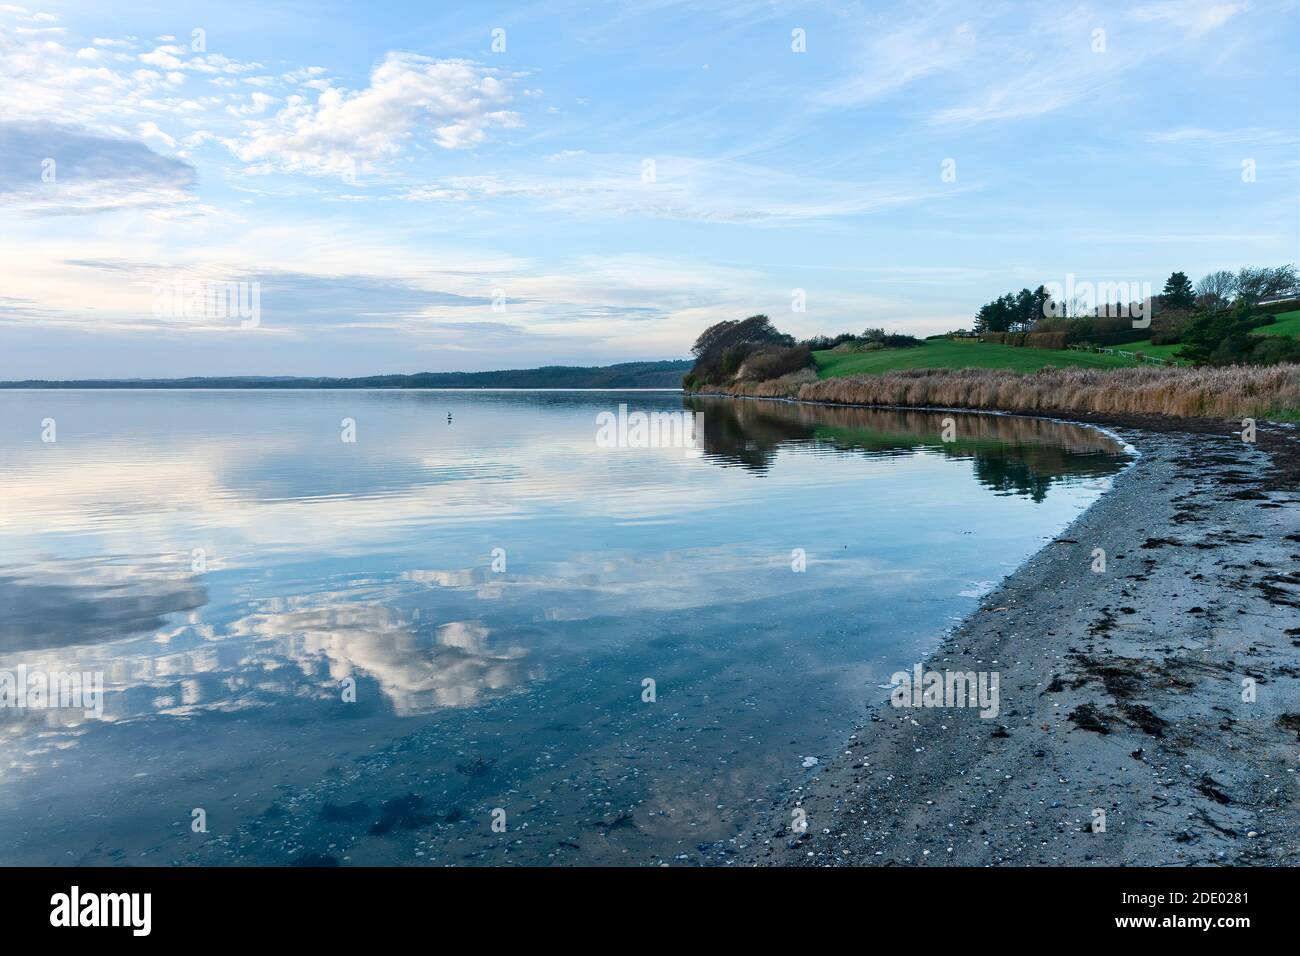 Reflection of clouds in the water at the inlet at Horsens, Denmark Stock Photo